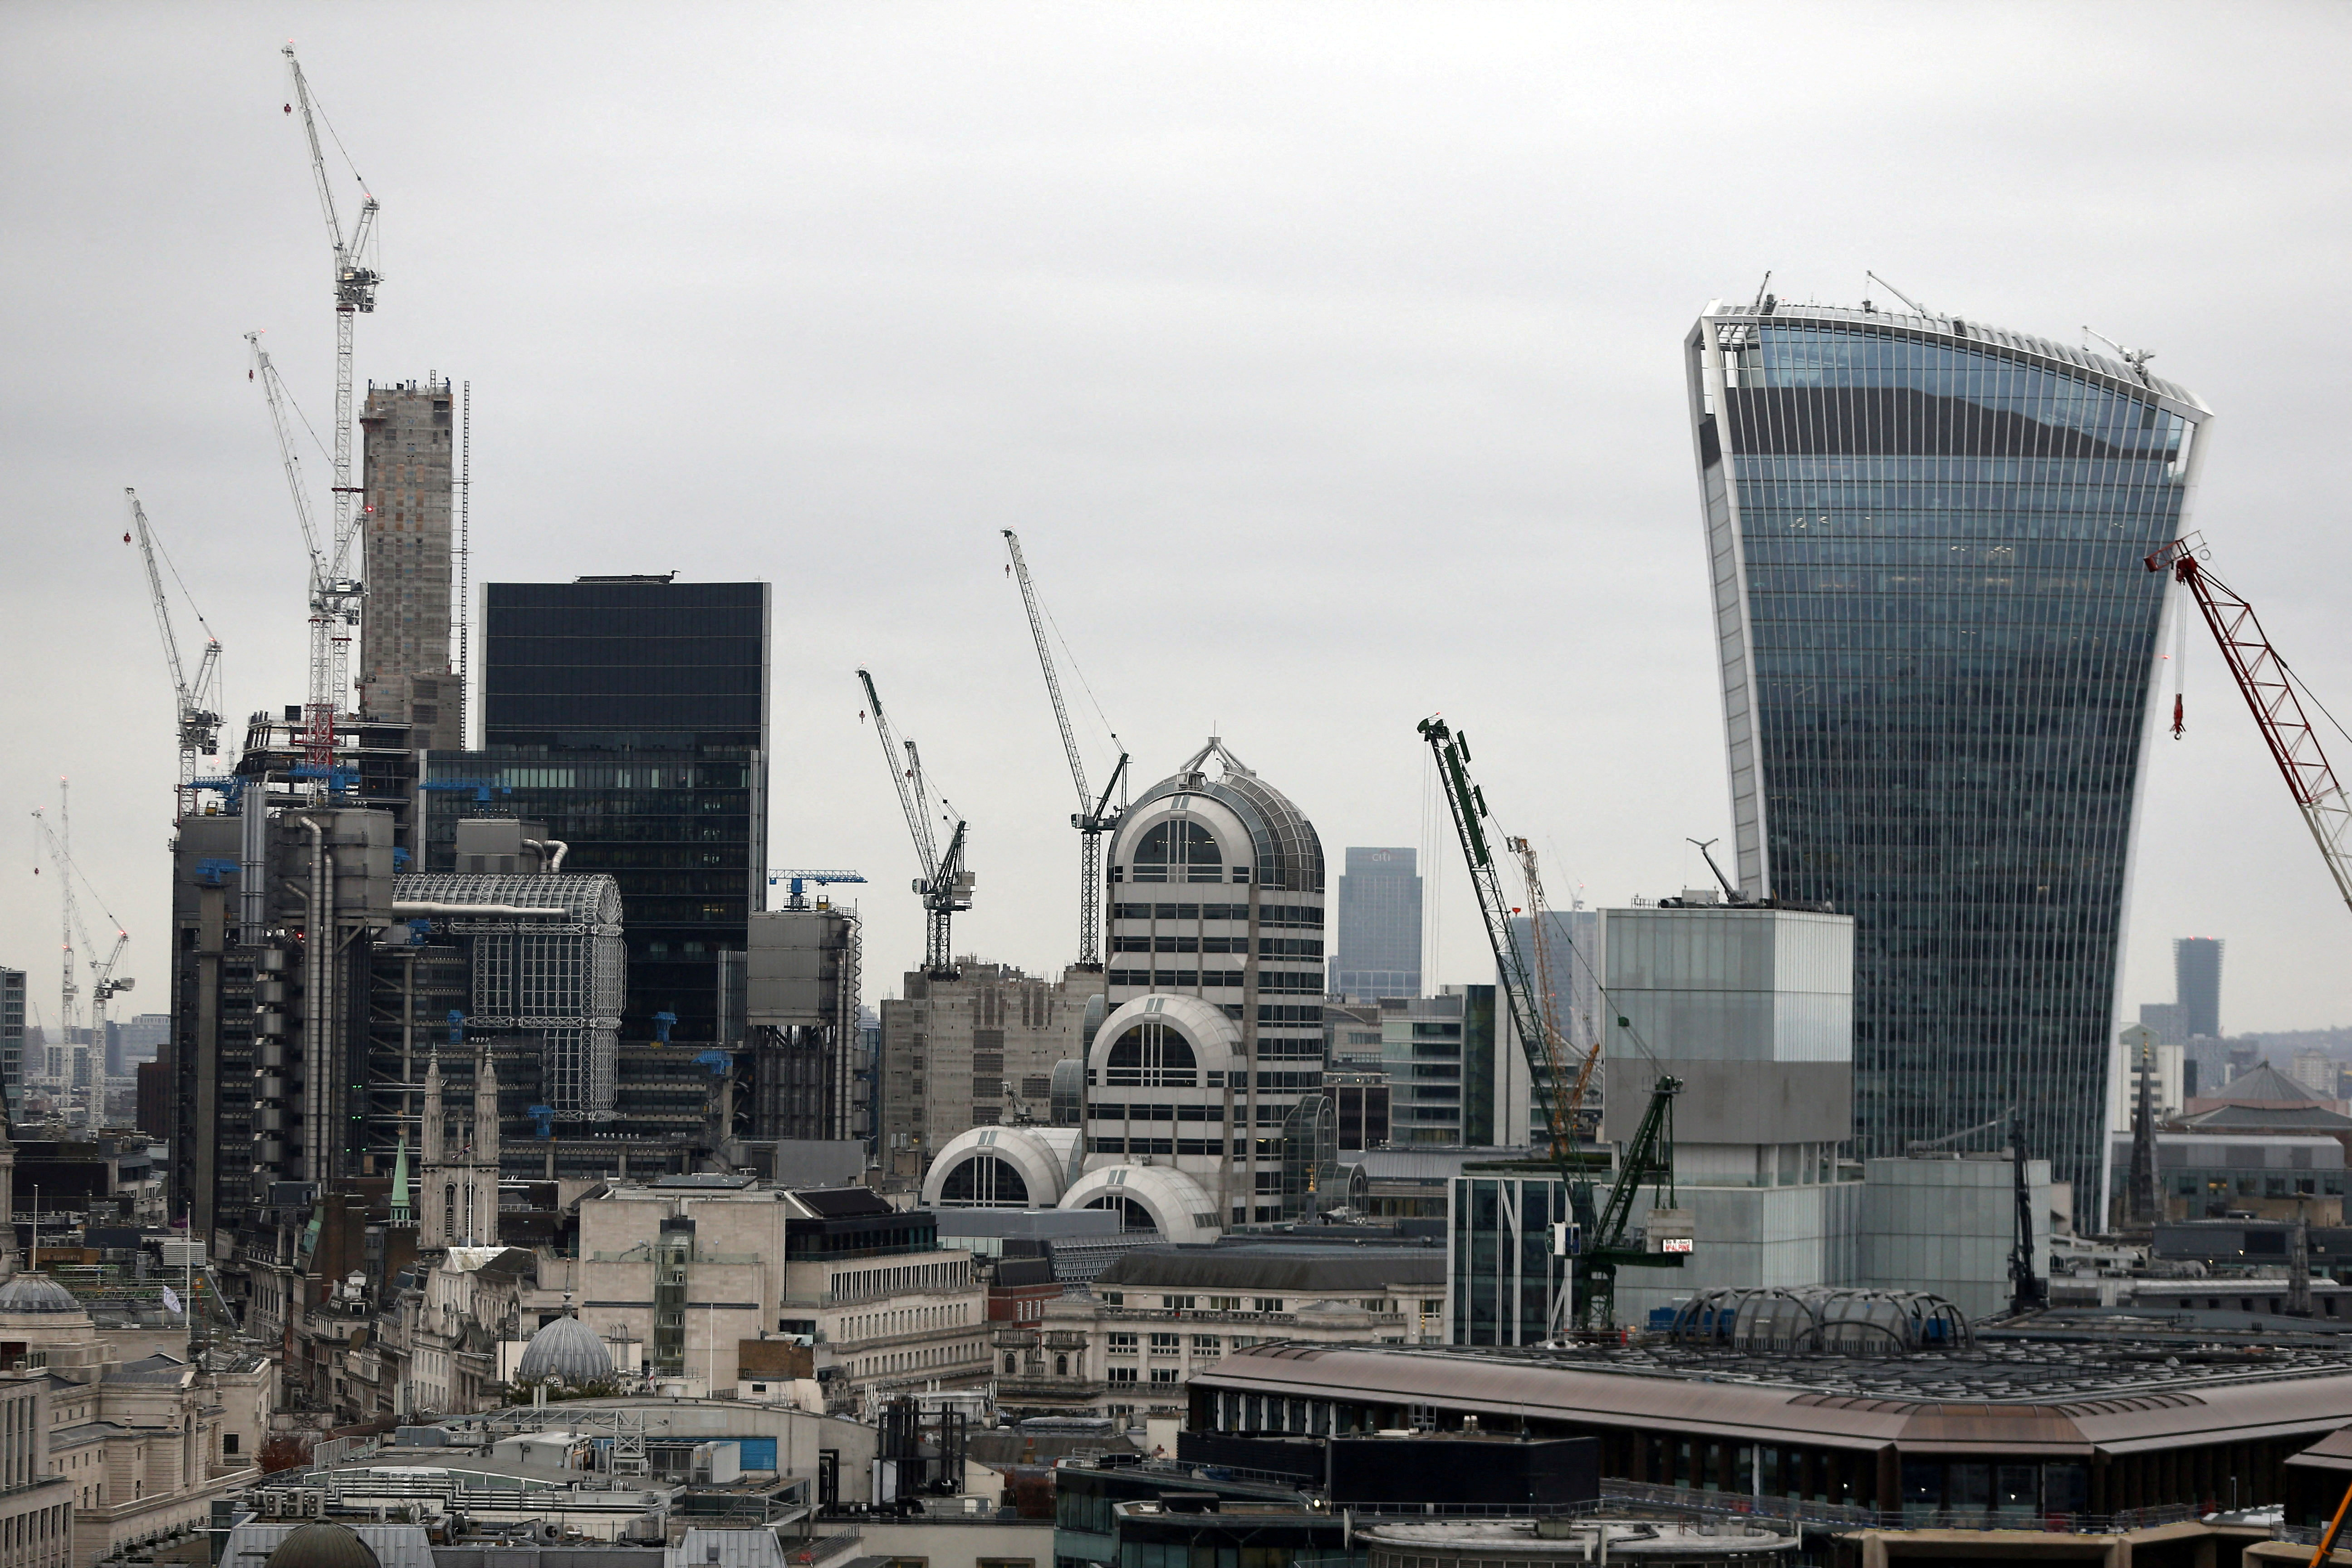 A view of the London skyline shows the City of London financial district, seen from St Paul's Cathedral in London